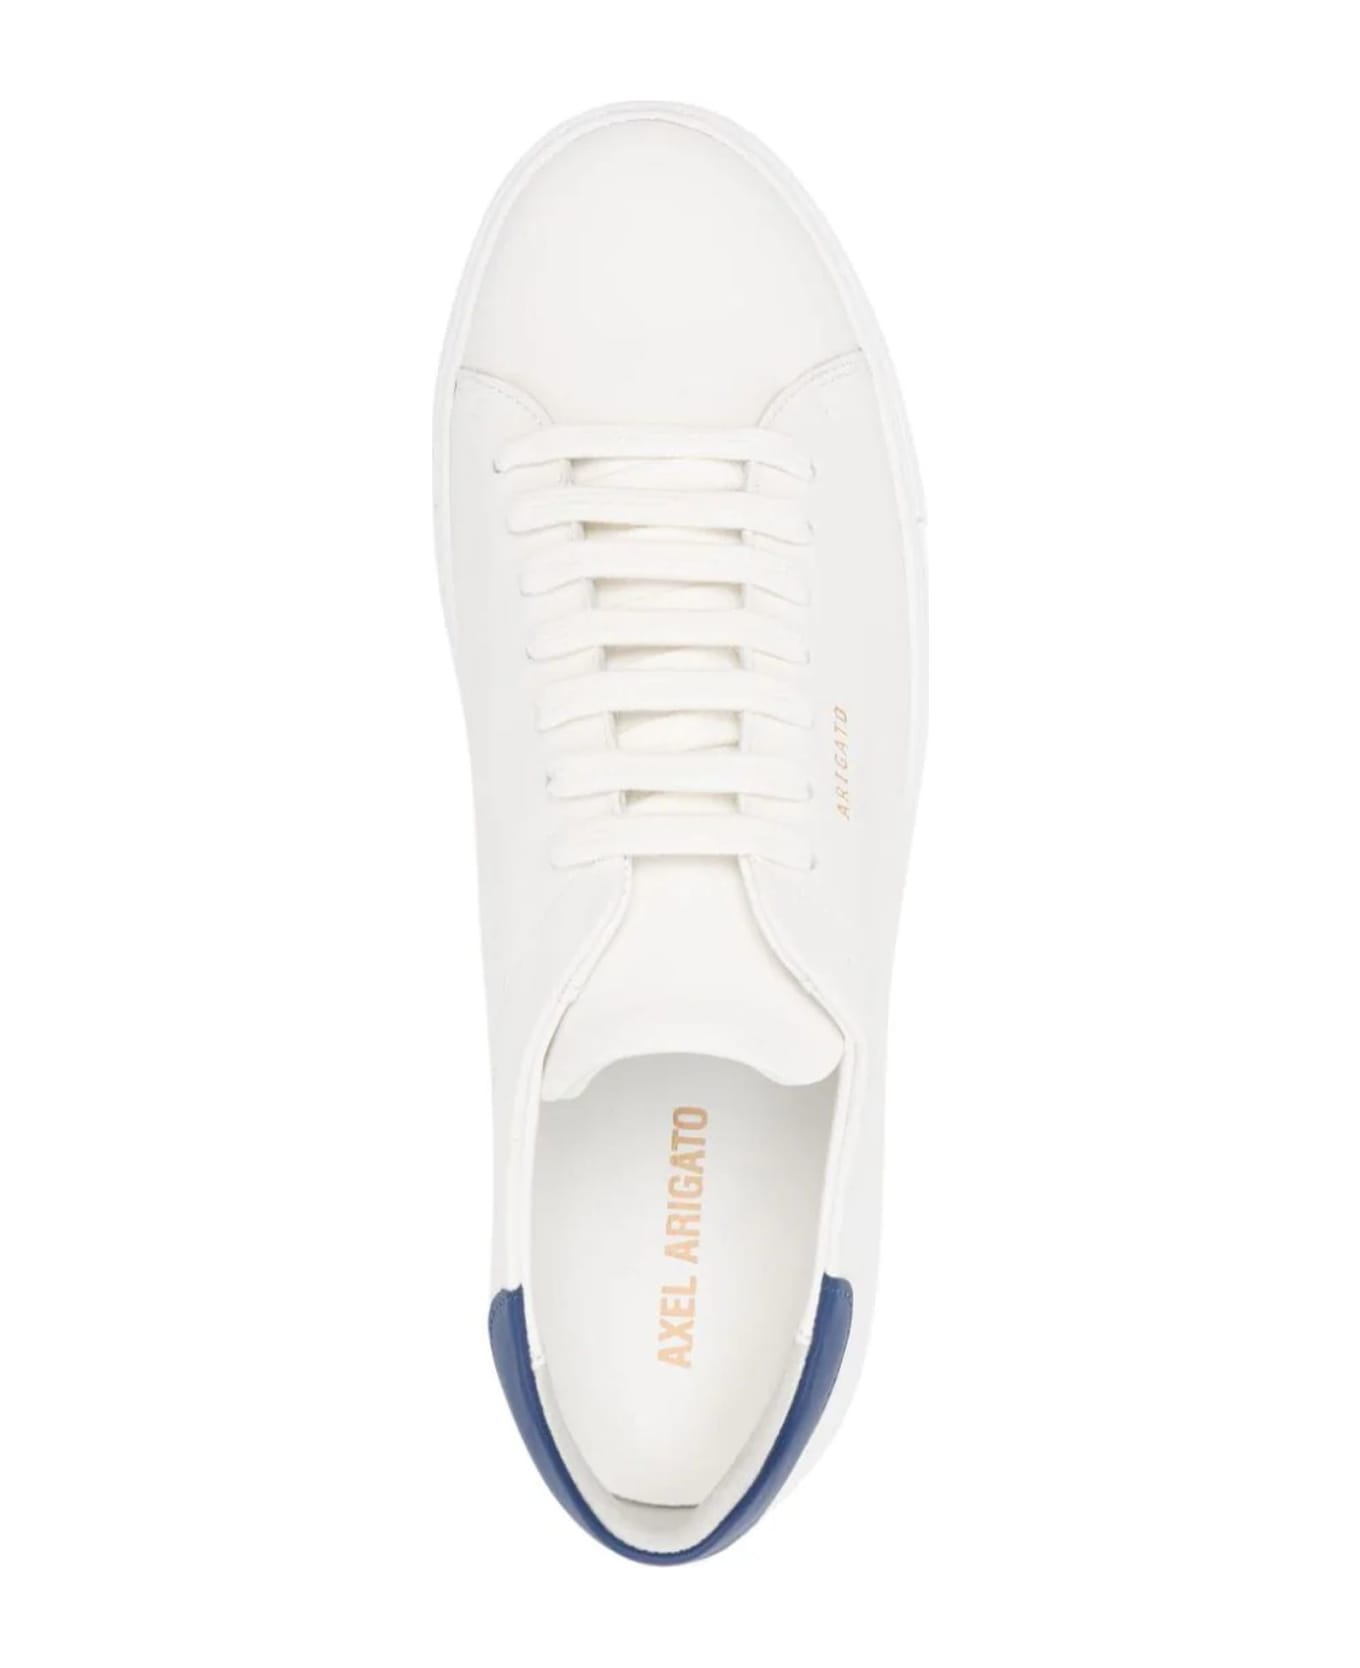 Axel Arigato White Clean 90 Leather Sneakers - White/navy スニーカー